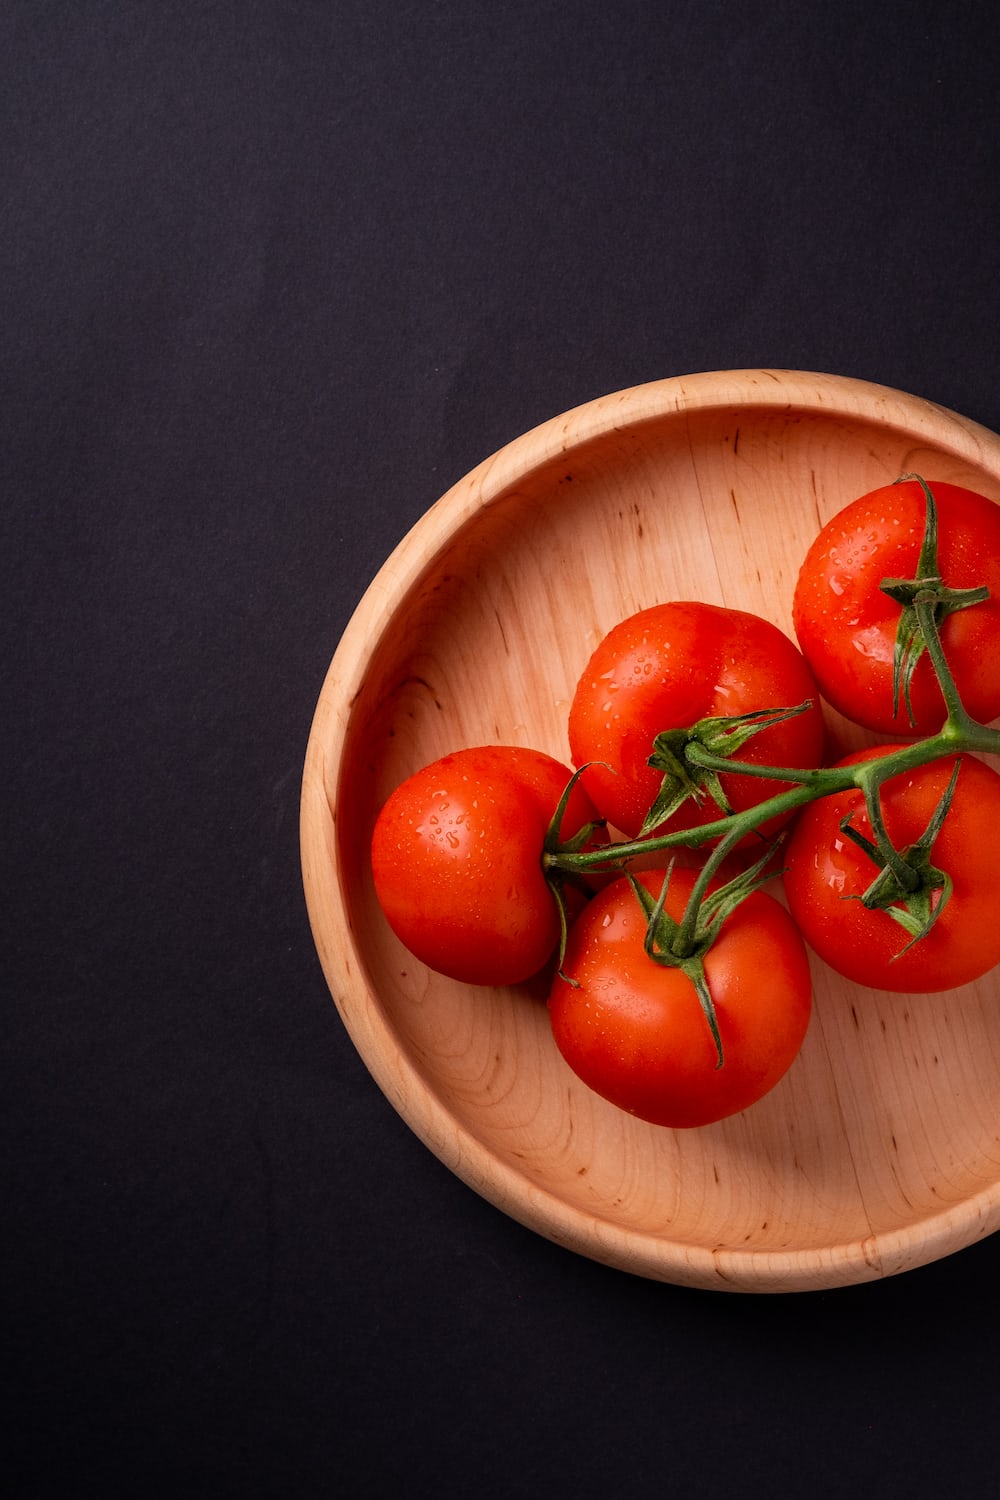 Tomatoes: The Superfood That’s Good for Your Heart, Skin, and More